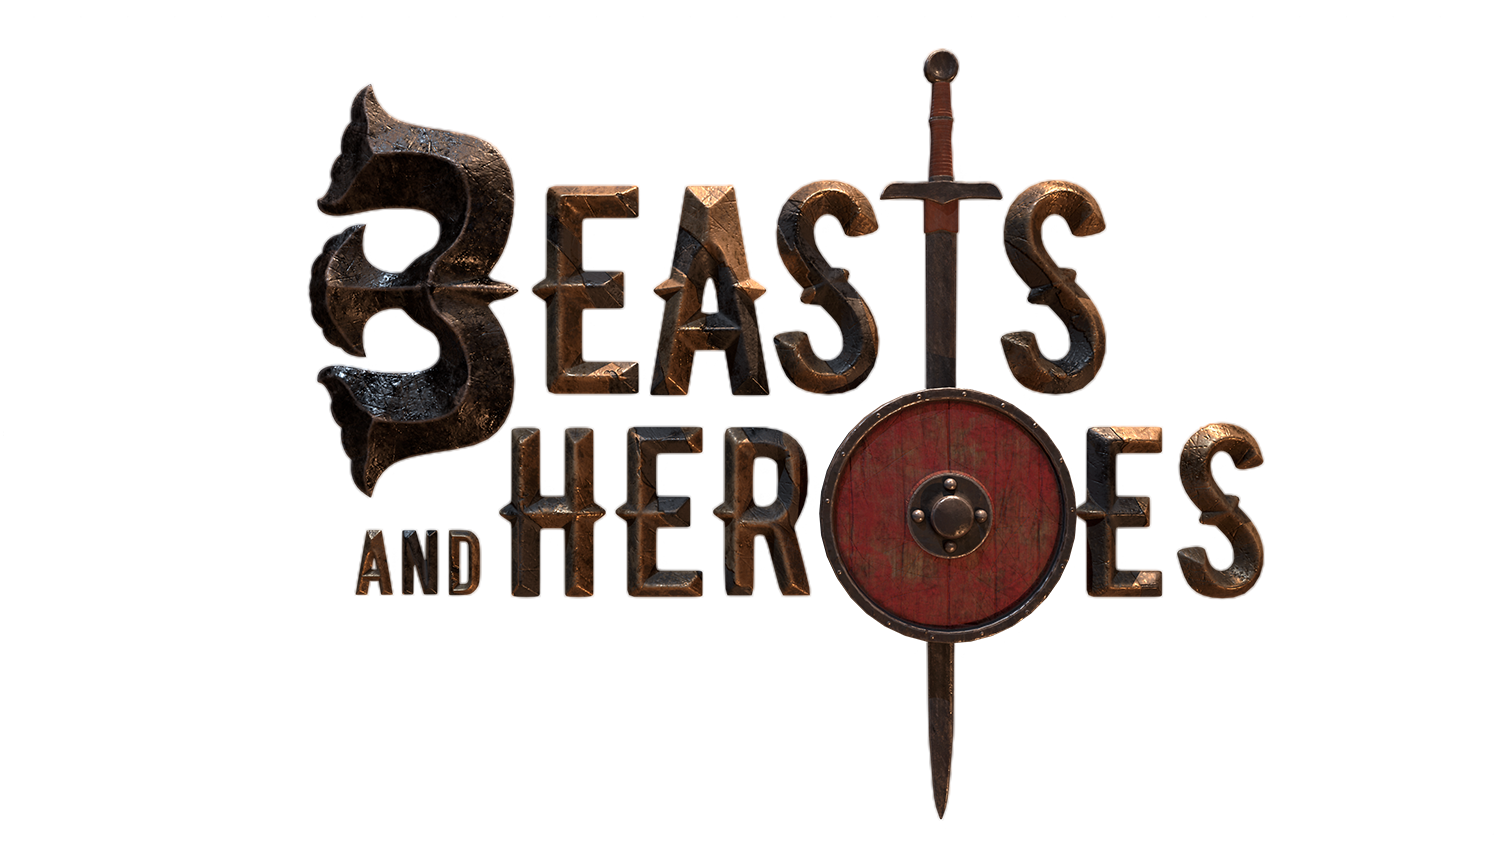 The proposed logo for Beasts and Heroes